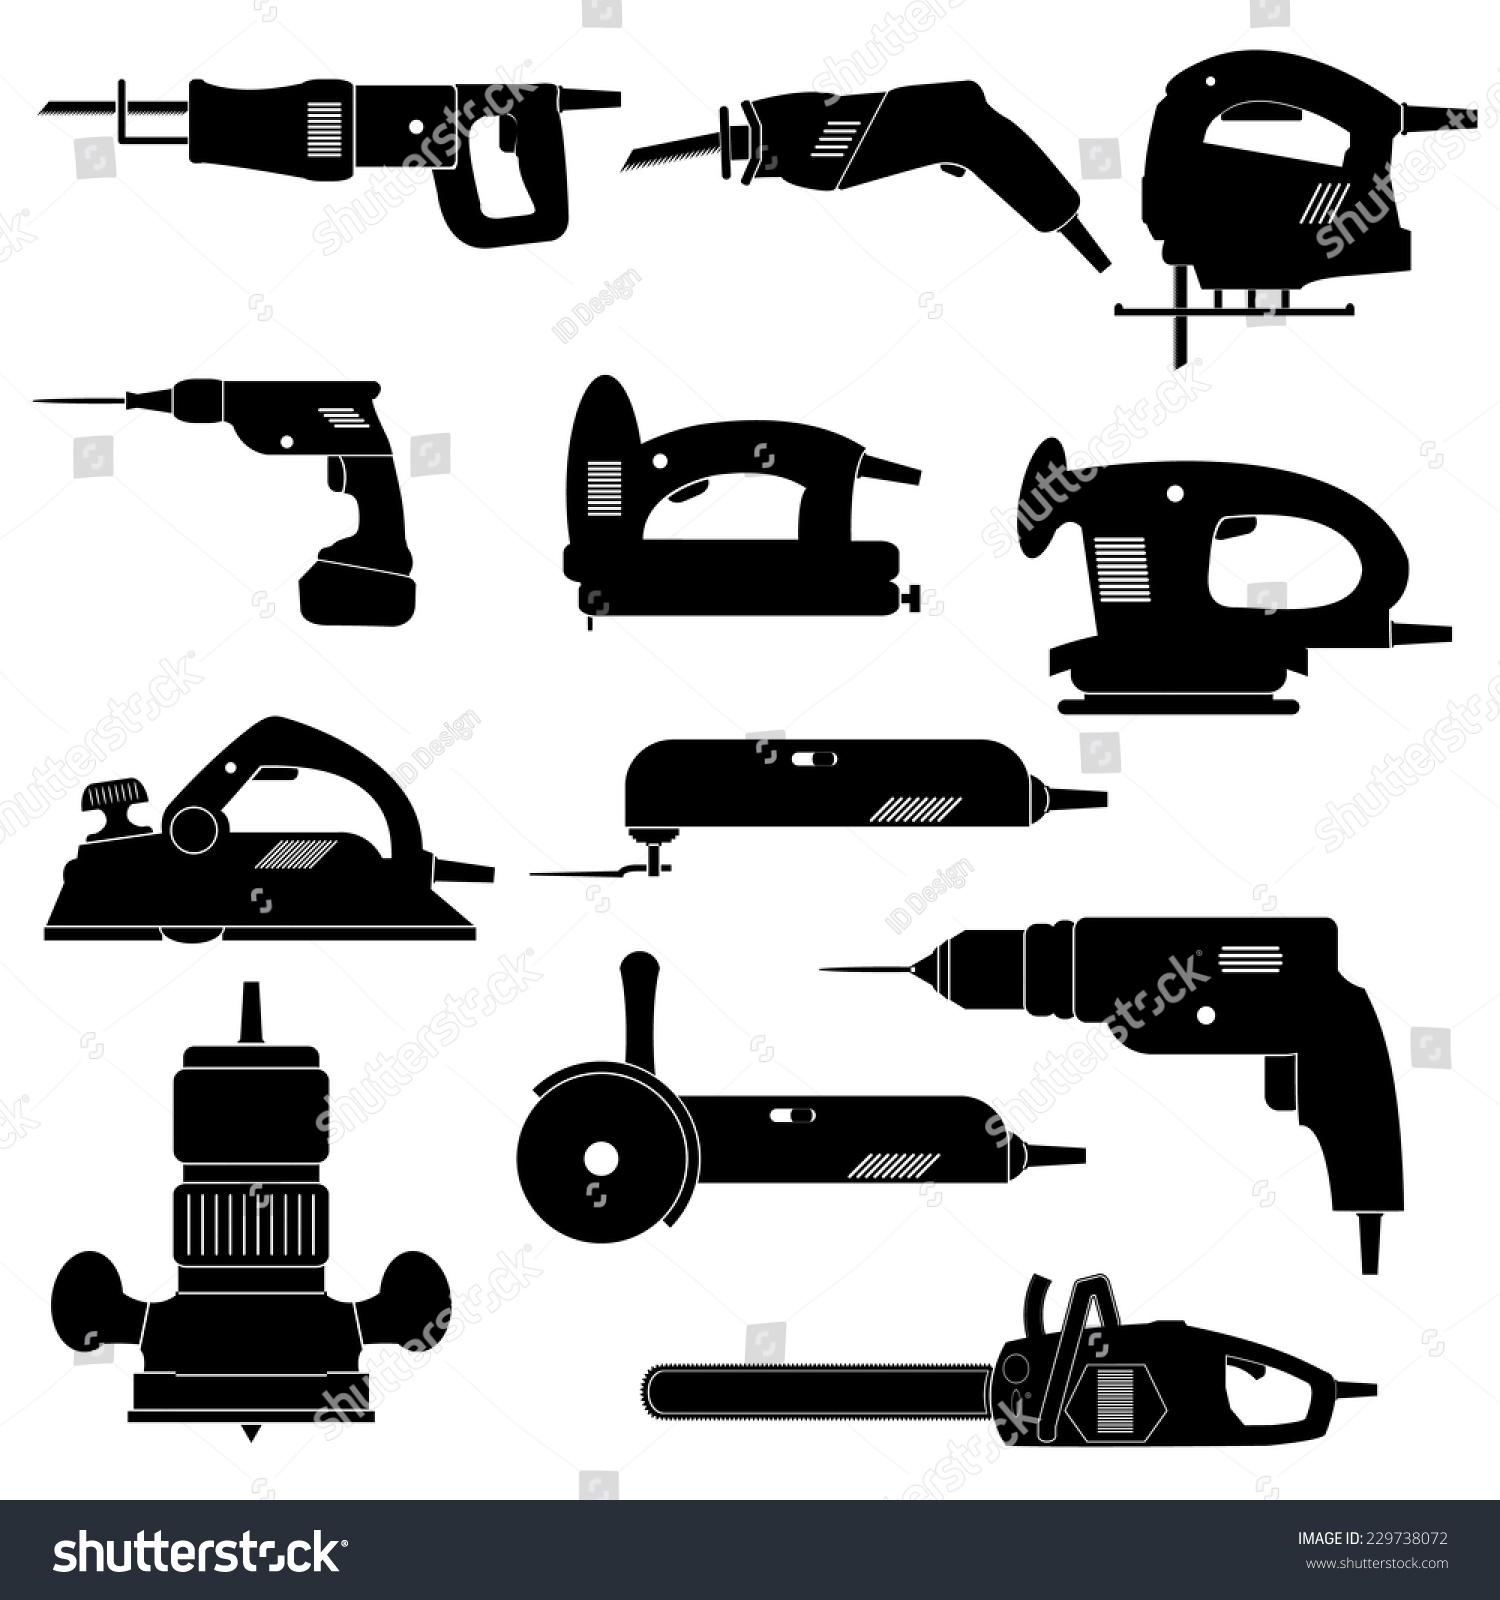 power saw clipart - photo #9